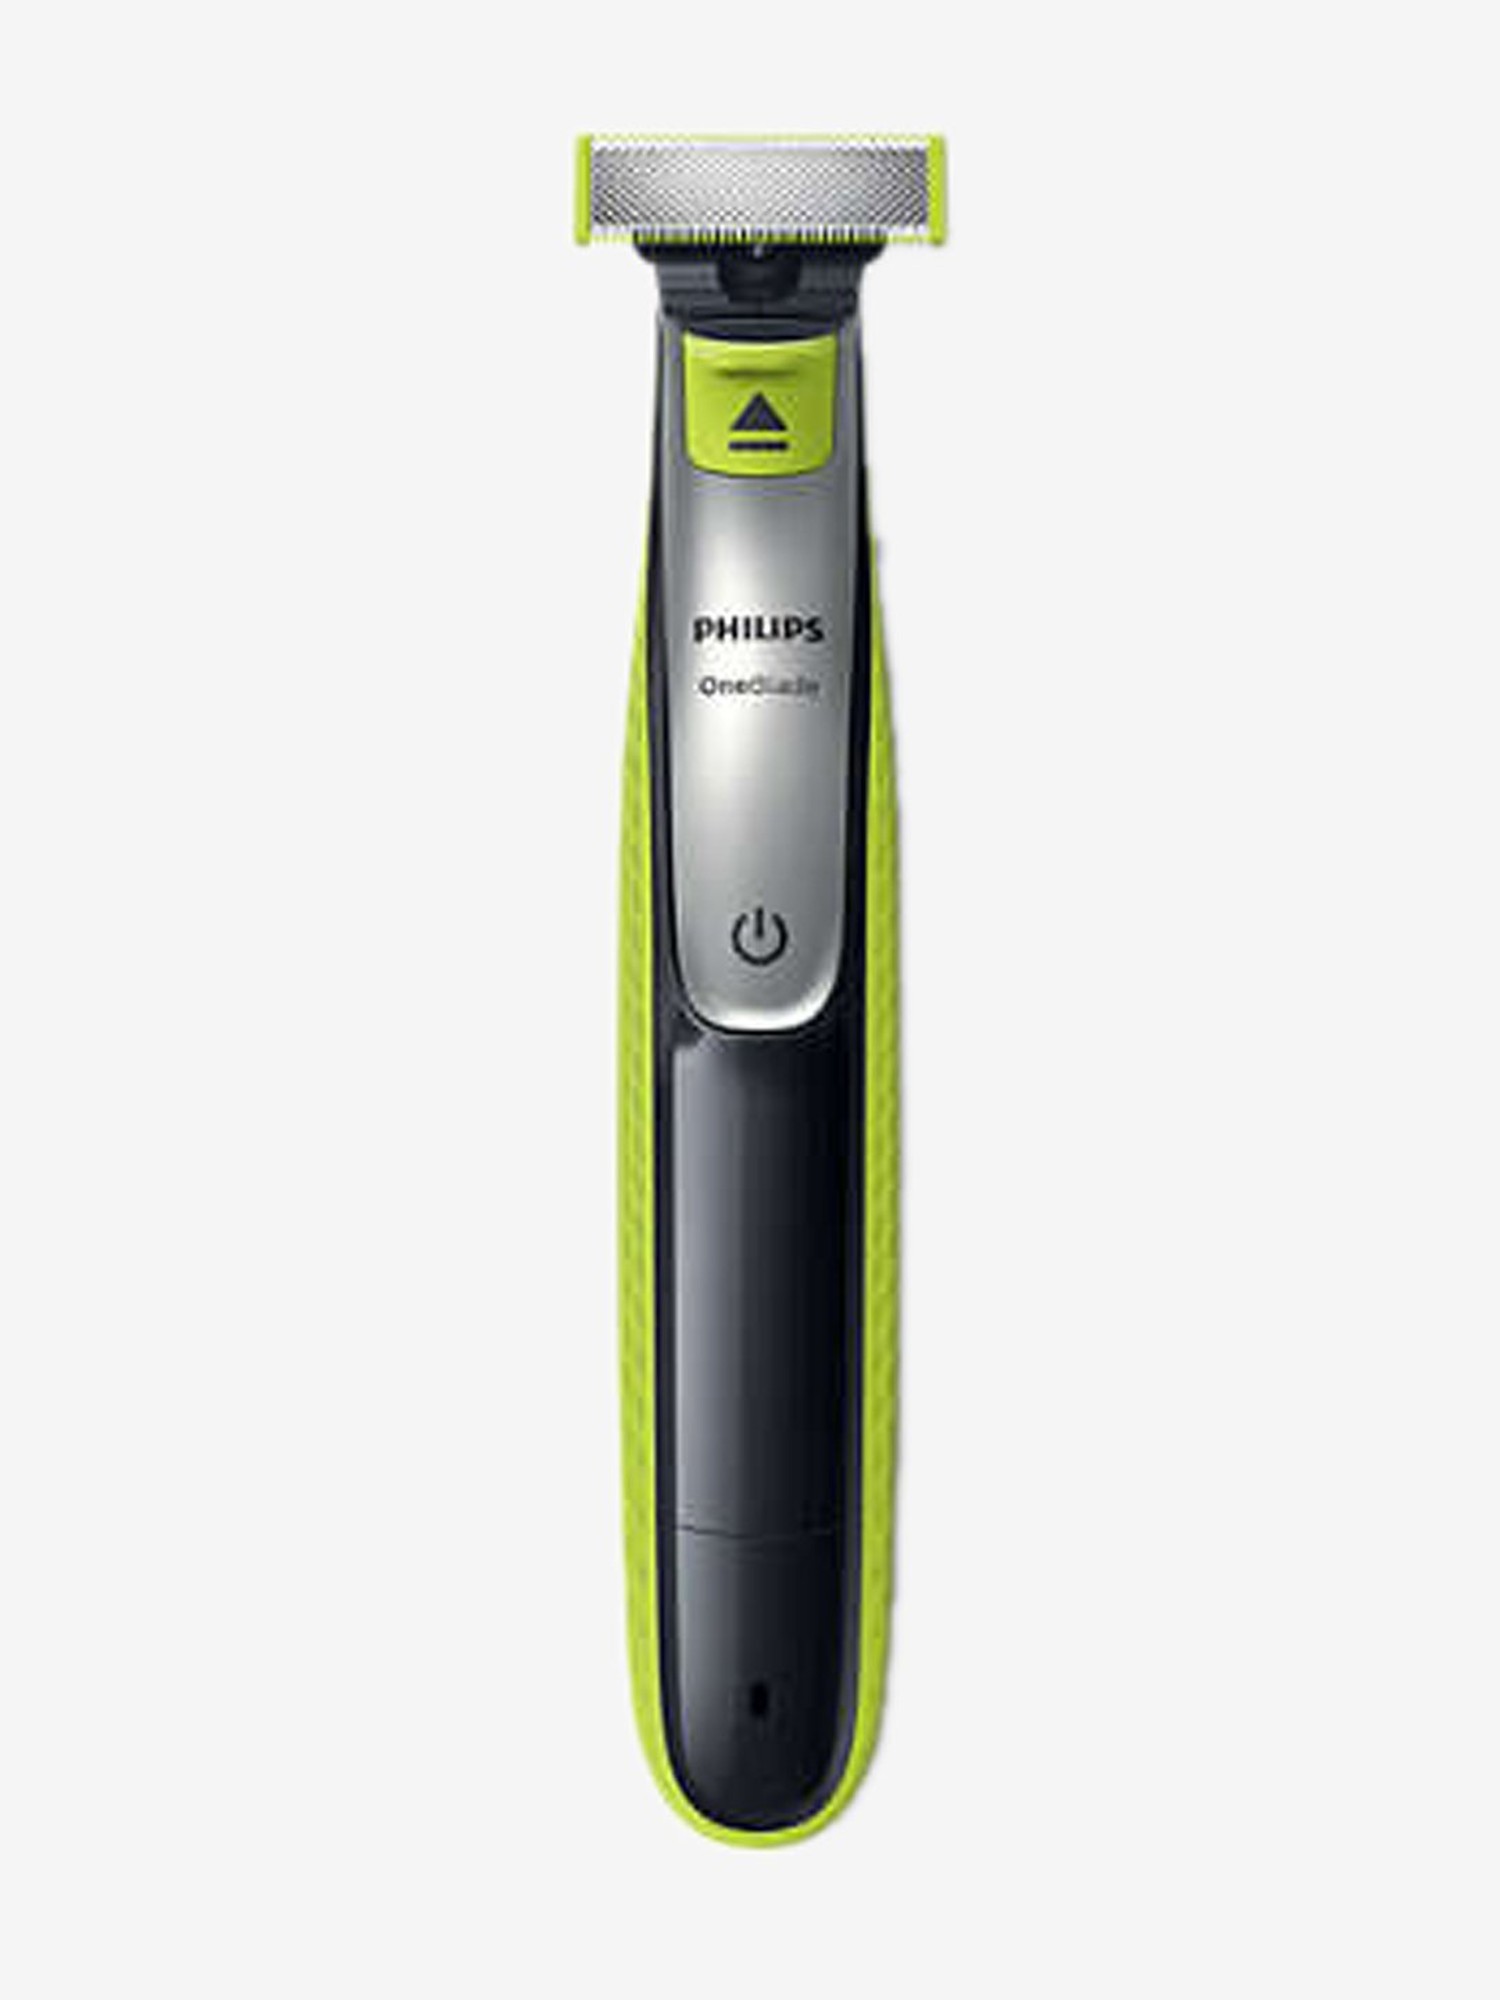 philips blades for trimmer